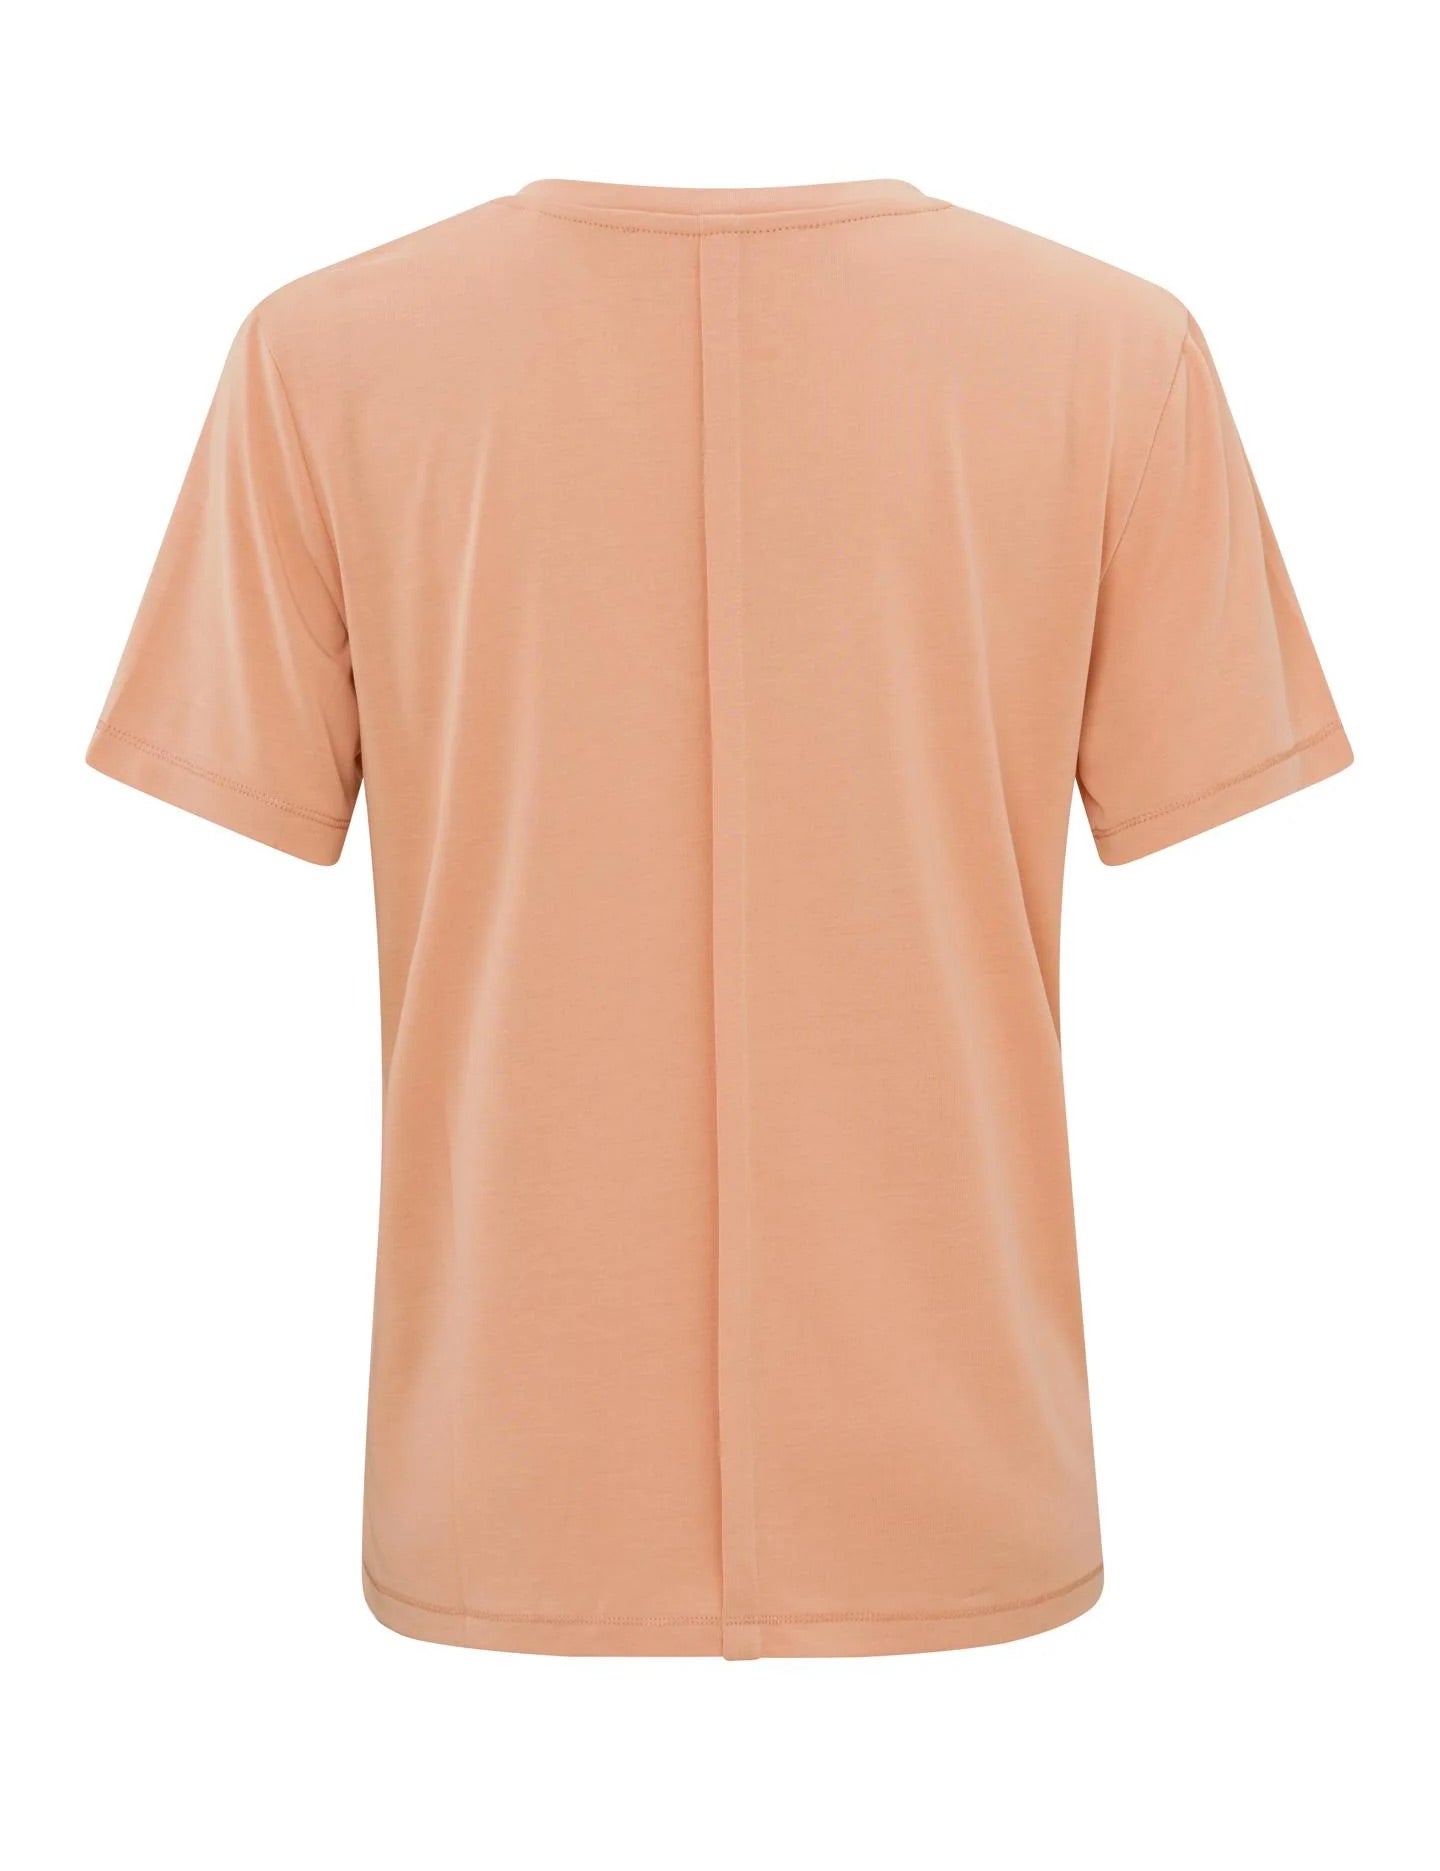 t-shirt-with-rounded-v-neck-and-short-sleeves-in-regular-fit-dusty-coral-orange_2880x_jpg.jpg